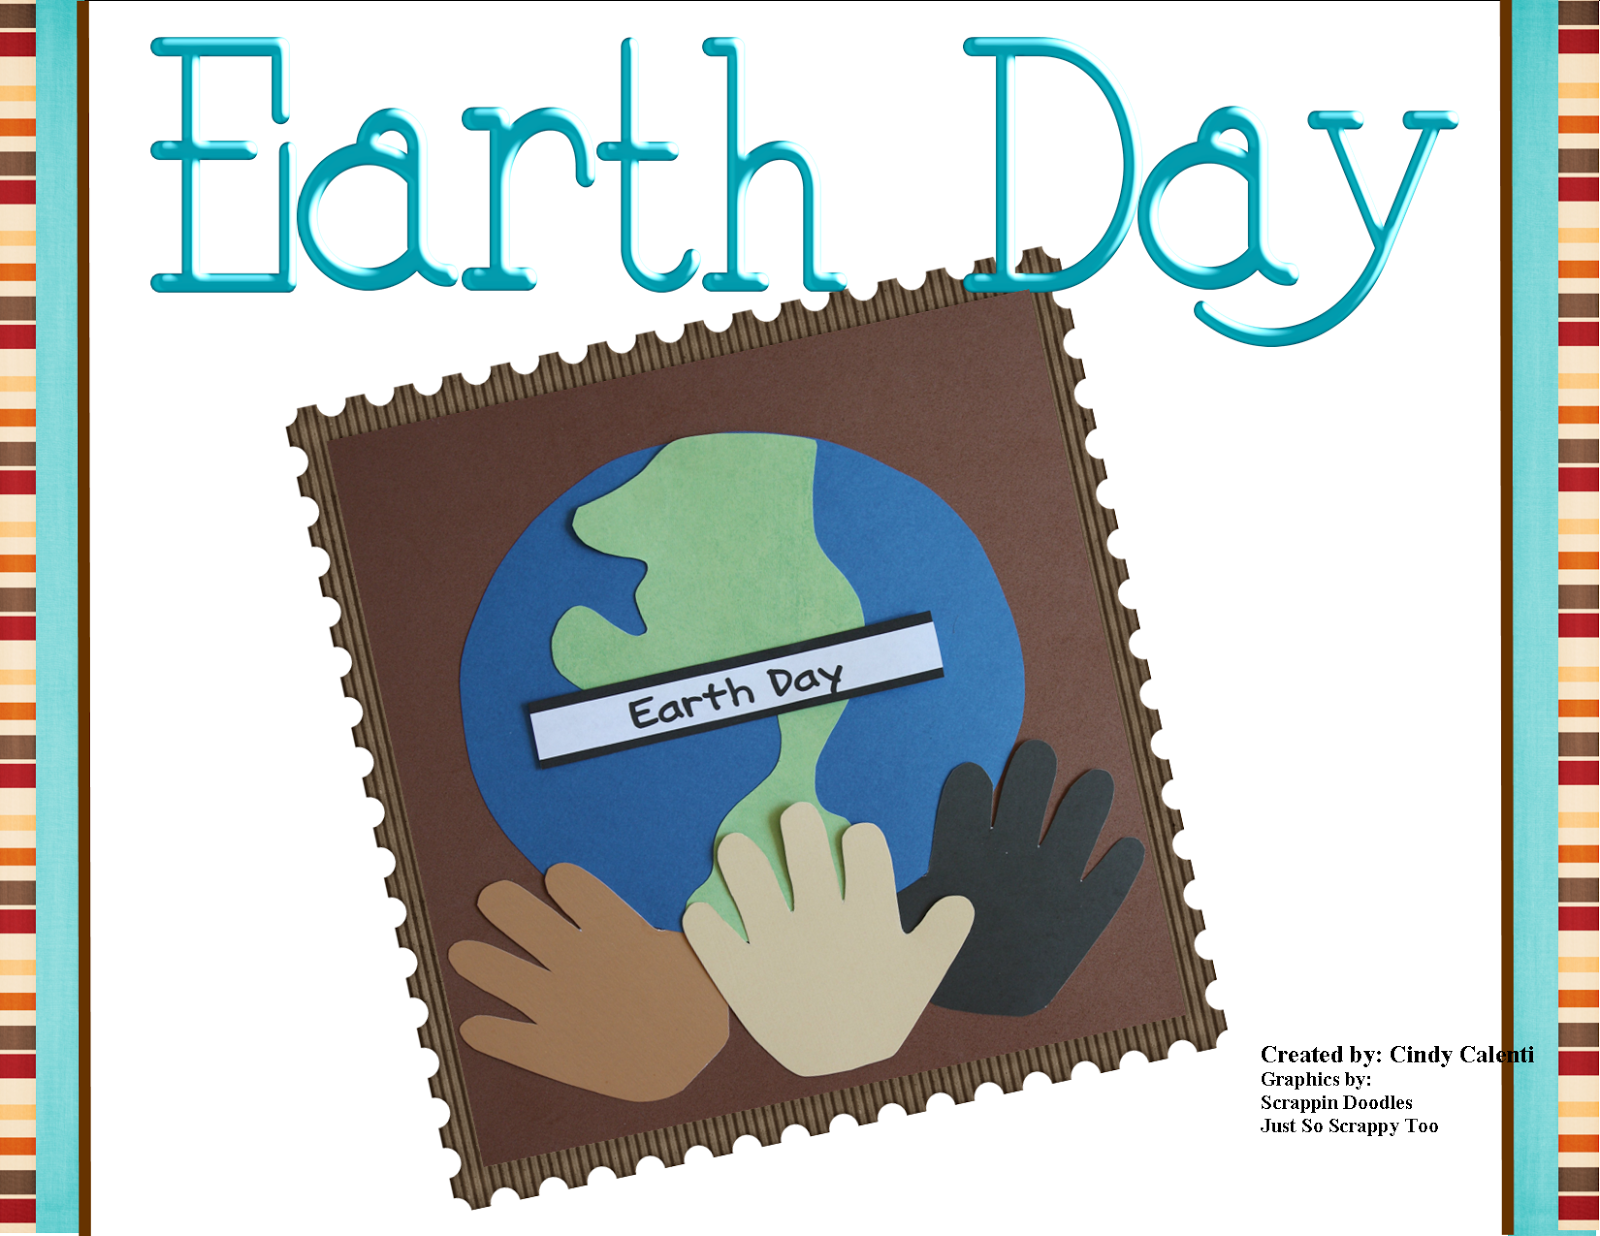 http://www.teacherspayteachers.com/Product/Earth-Day-Craft-and-Writing-Prompts-600575